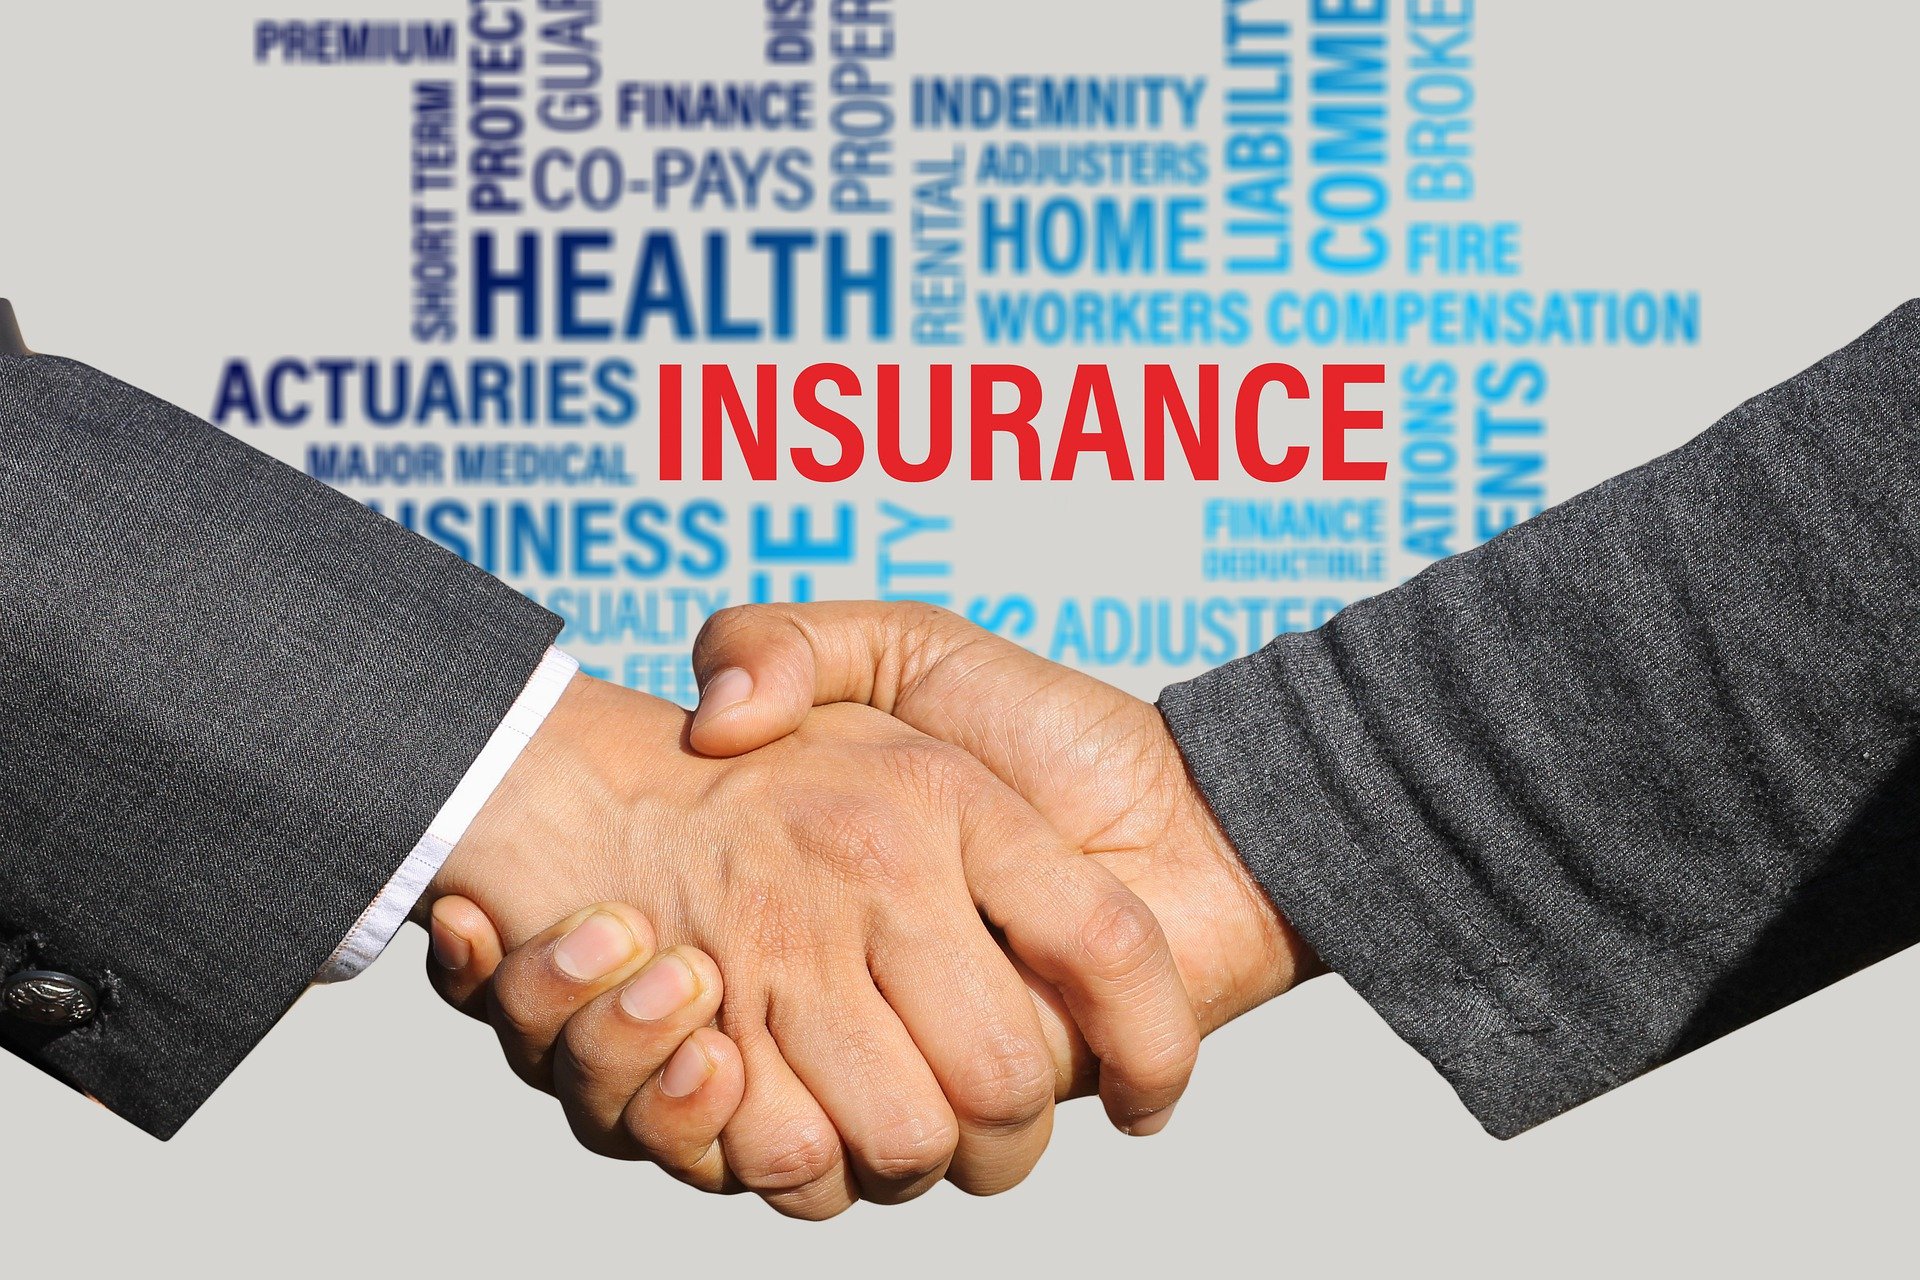 An insurer shaking hands with an entrepreneur after providing him an insurance policy